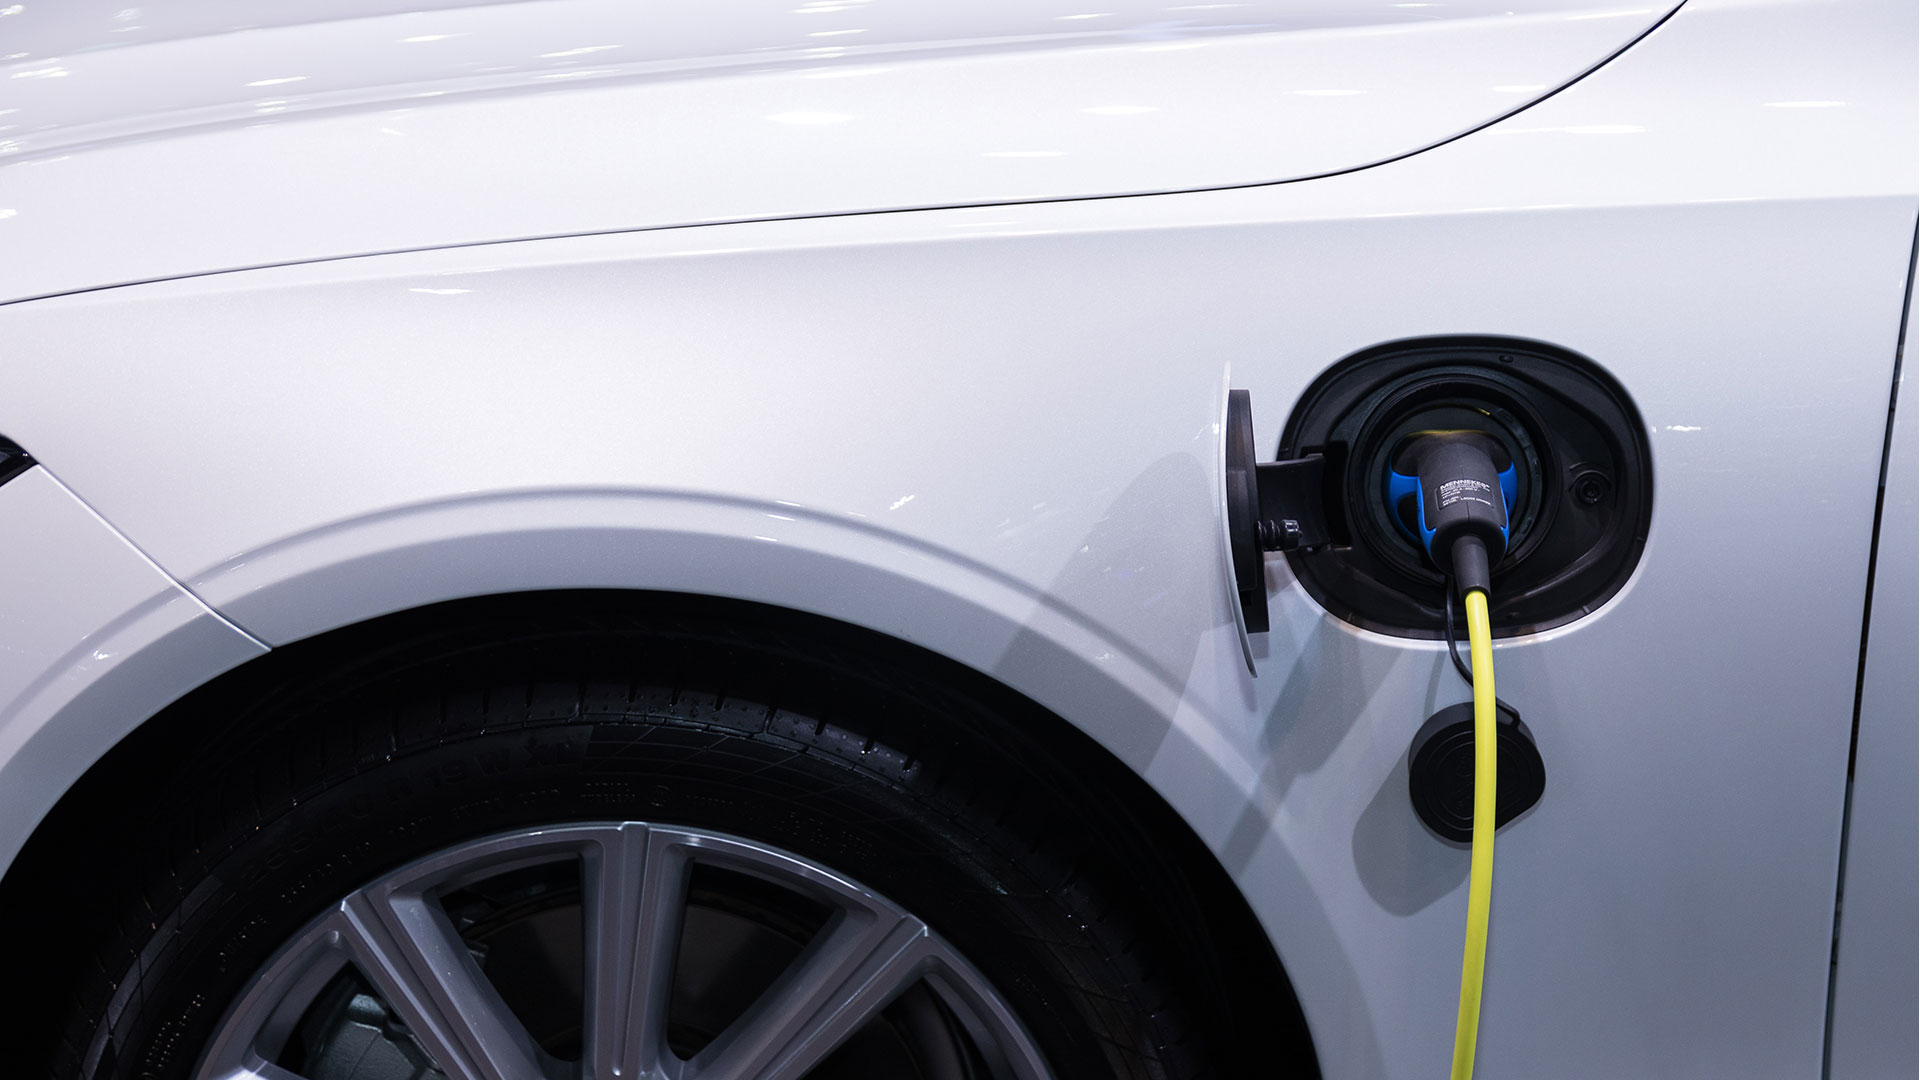 In the Media: As interest in electric vehicles soars, experts say they haven't quite hit the mainstream